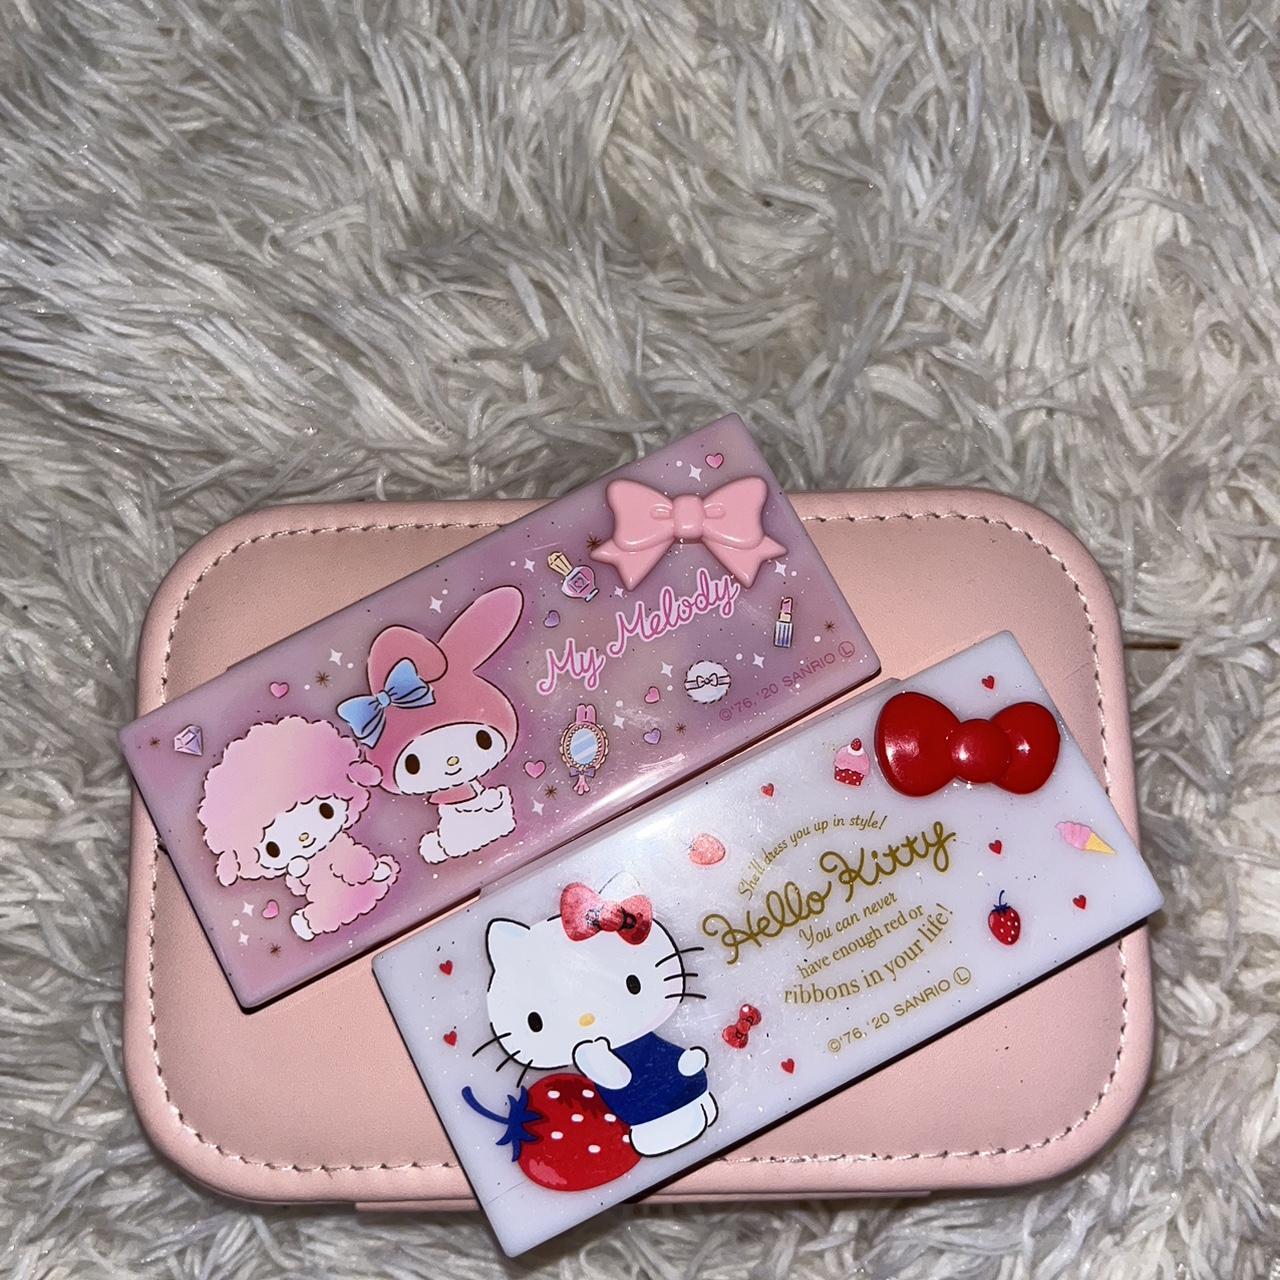 Hello kitty/ my melody sparkly cases $25 both $11 - Depop